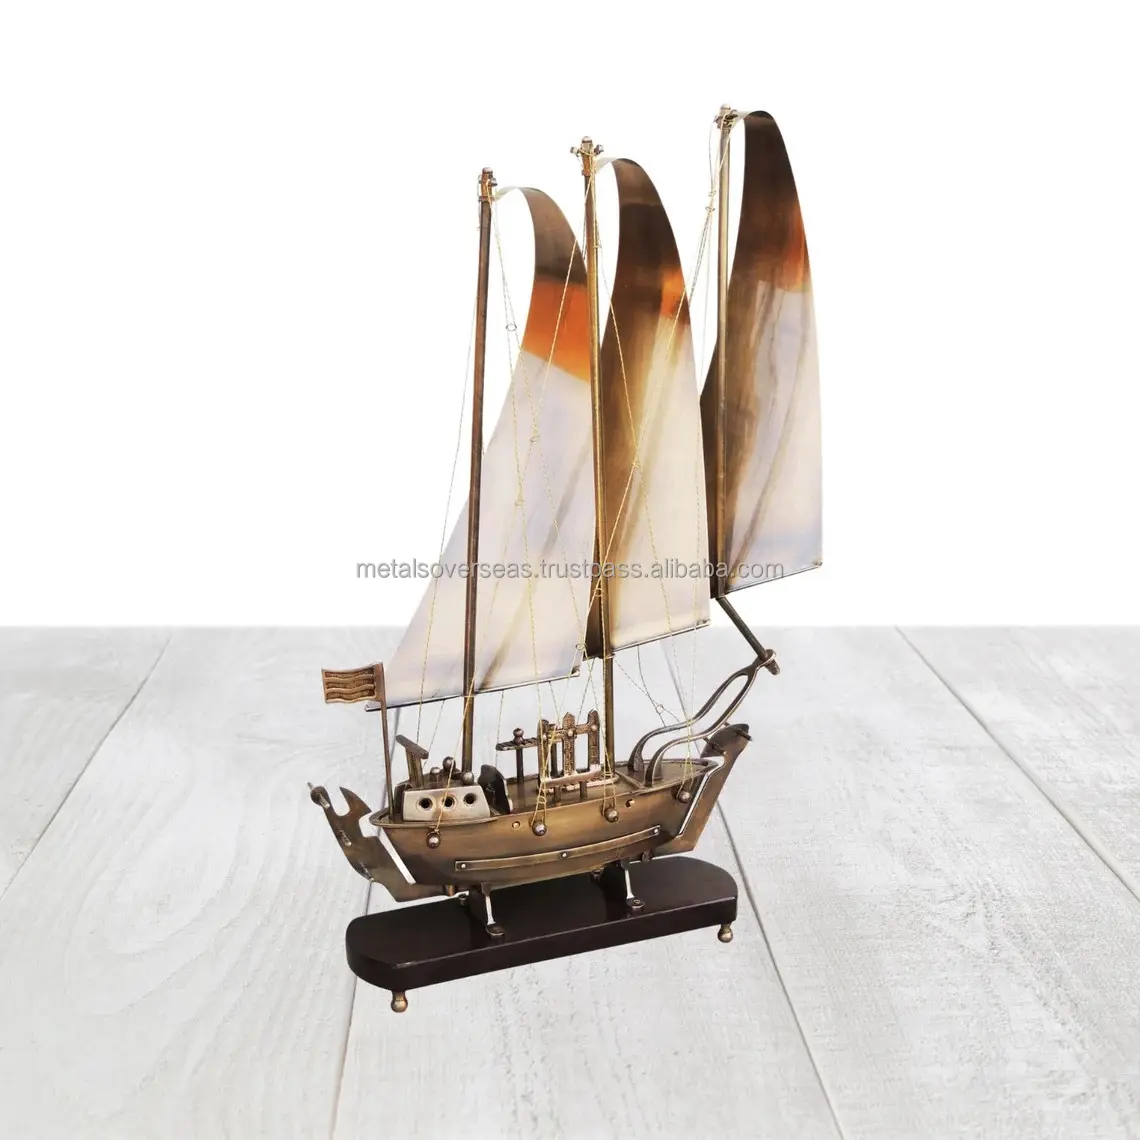 Best Price Brass Table Ship Home Use Showpiece Ship Big Wholesale Luxury Shinning Sailing boat Ship Model For Home Decoration